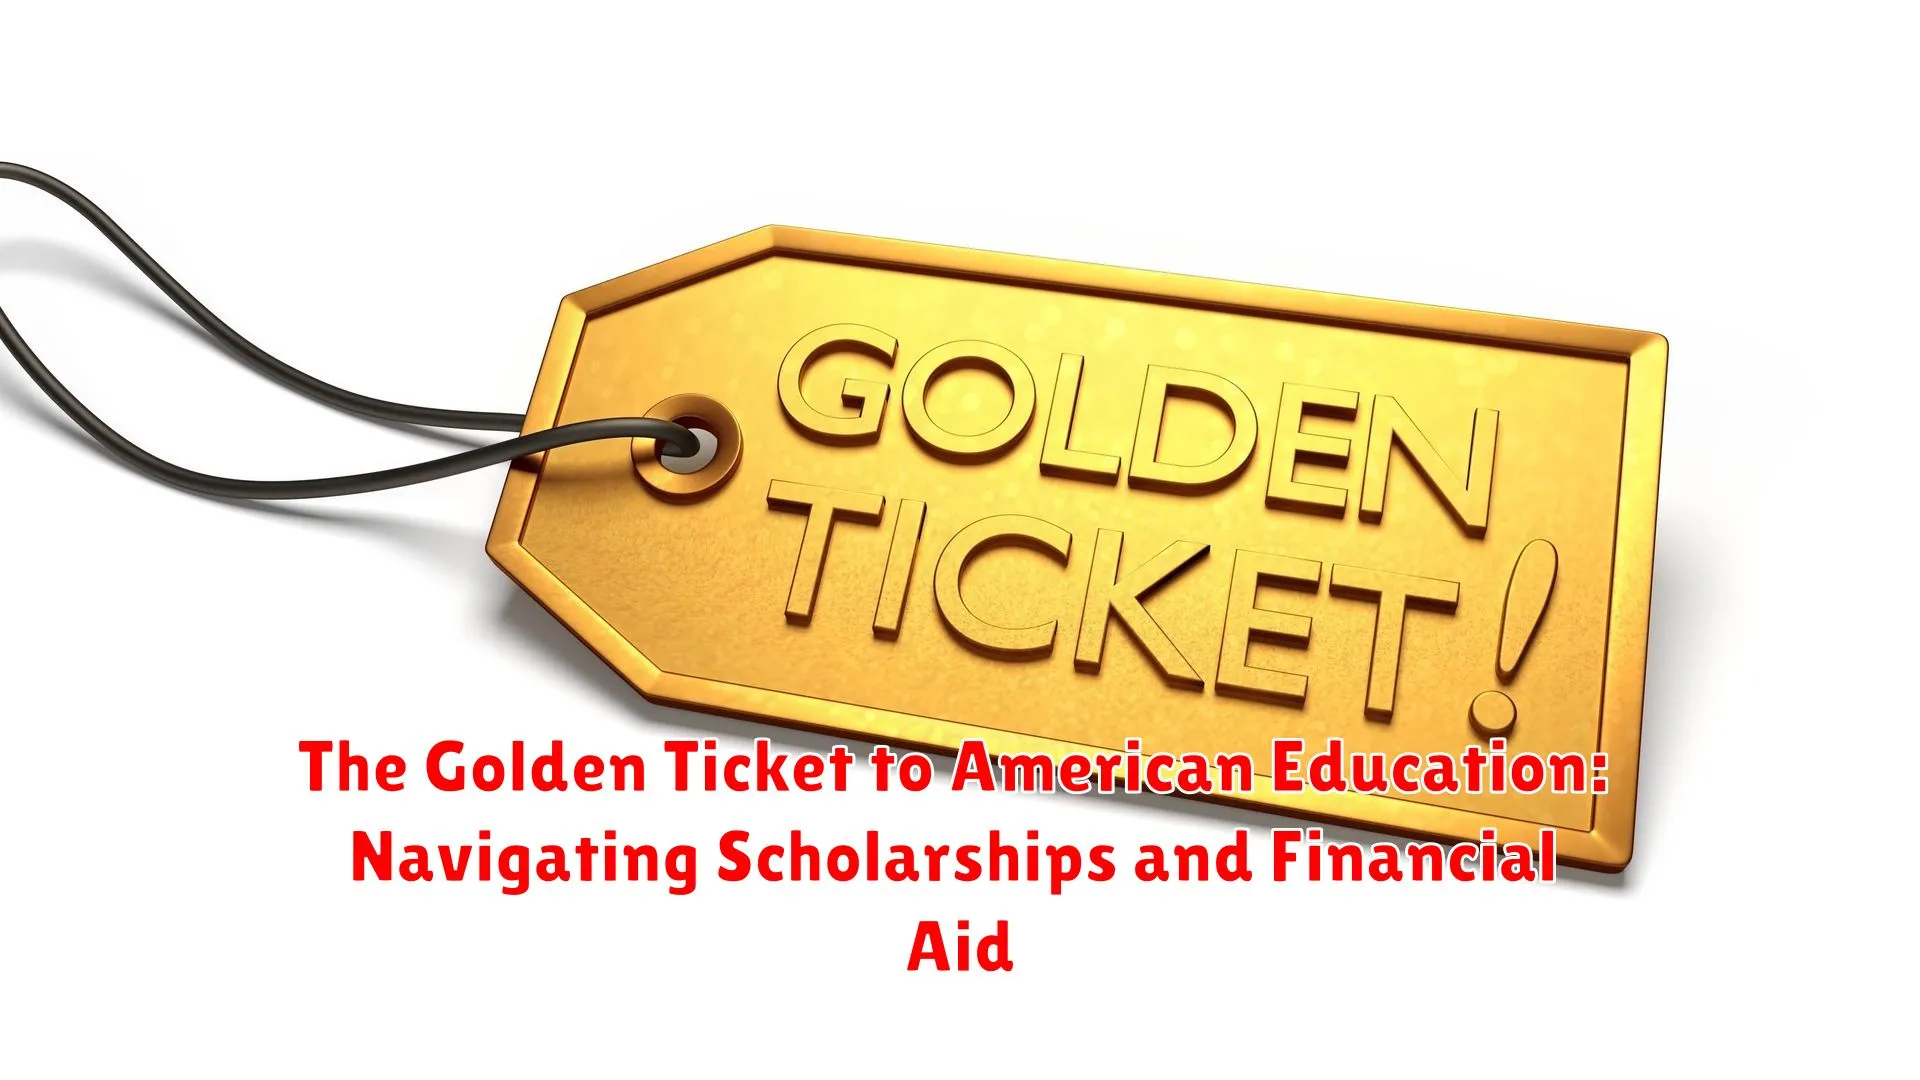 The Golden Ticket to American Education: Navigating Scholarships and Financial Aid